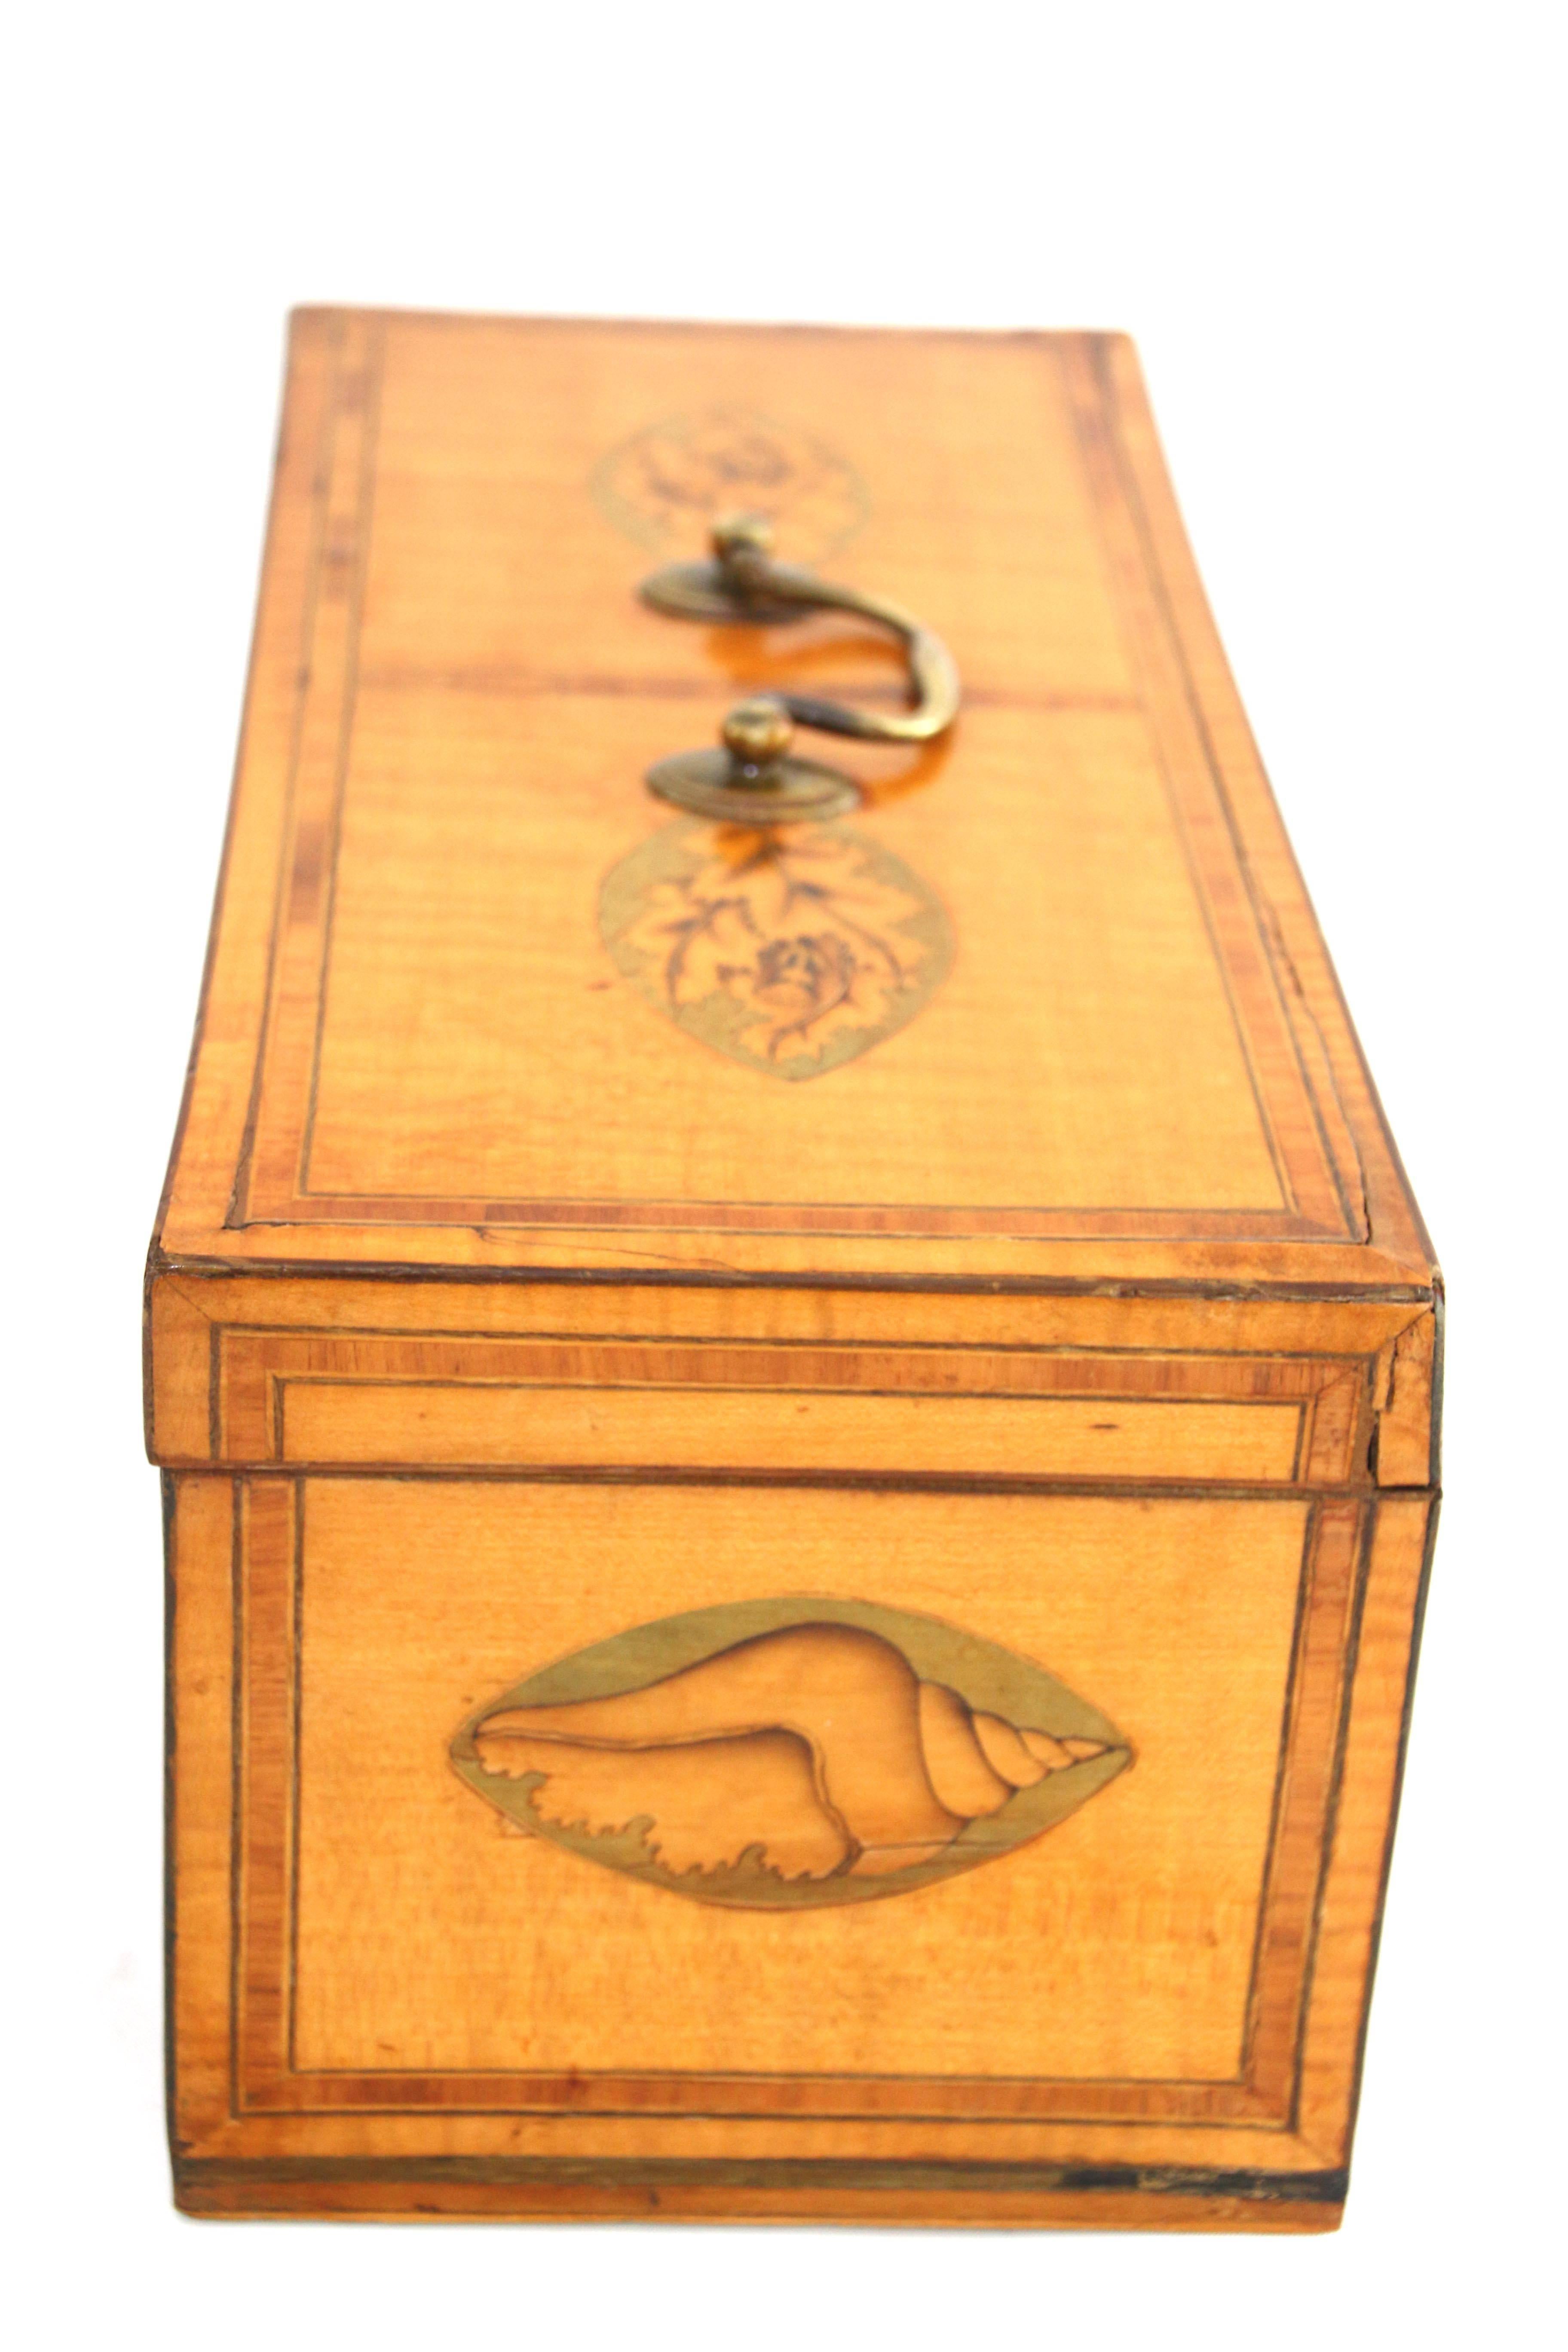 Late 18th Century 18th Century Satinwood Tea Caddy with Oval Inlaid Panels